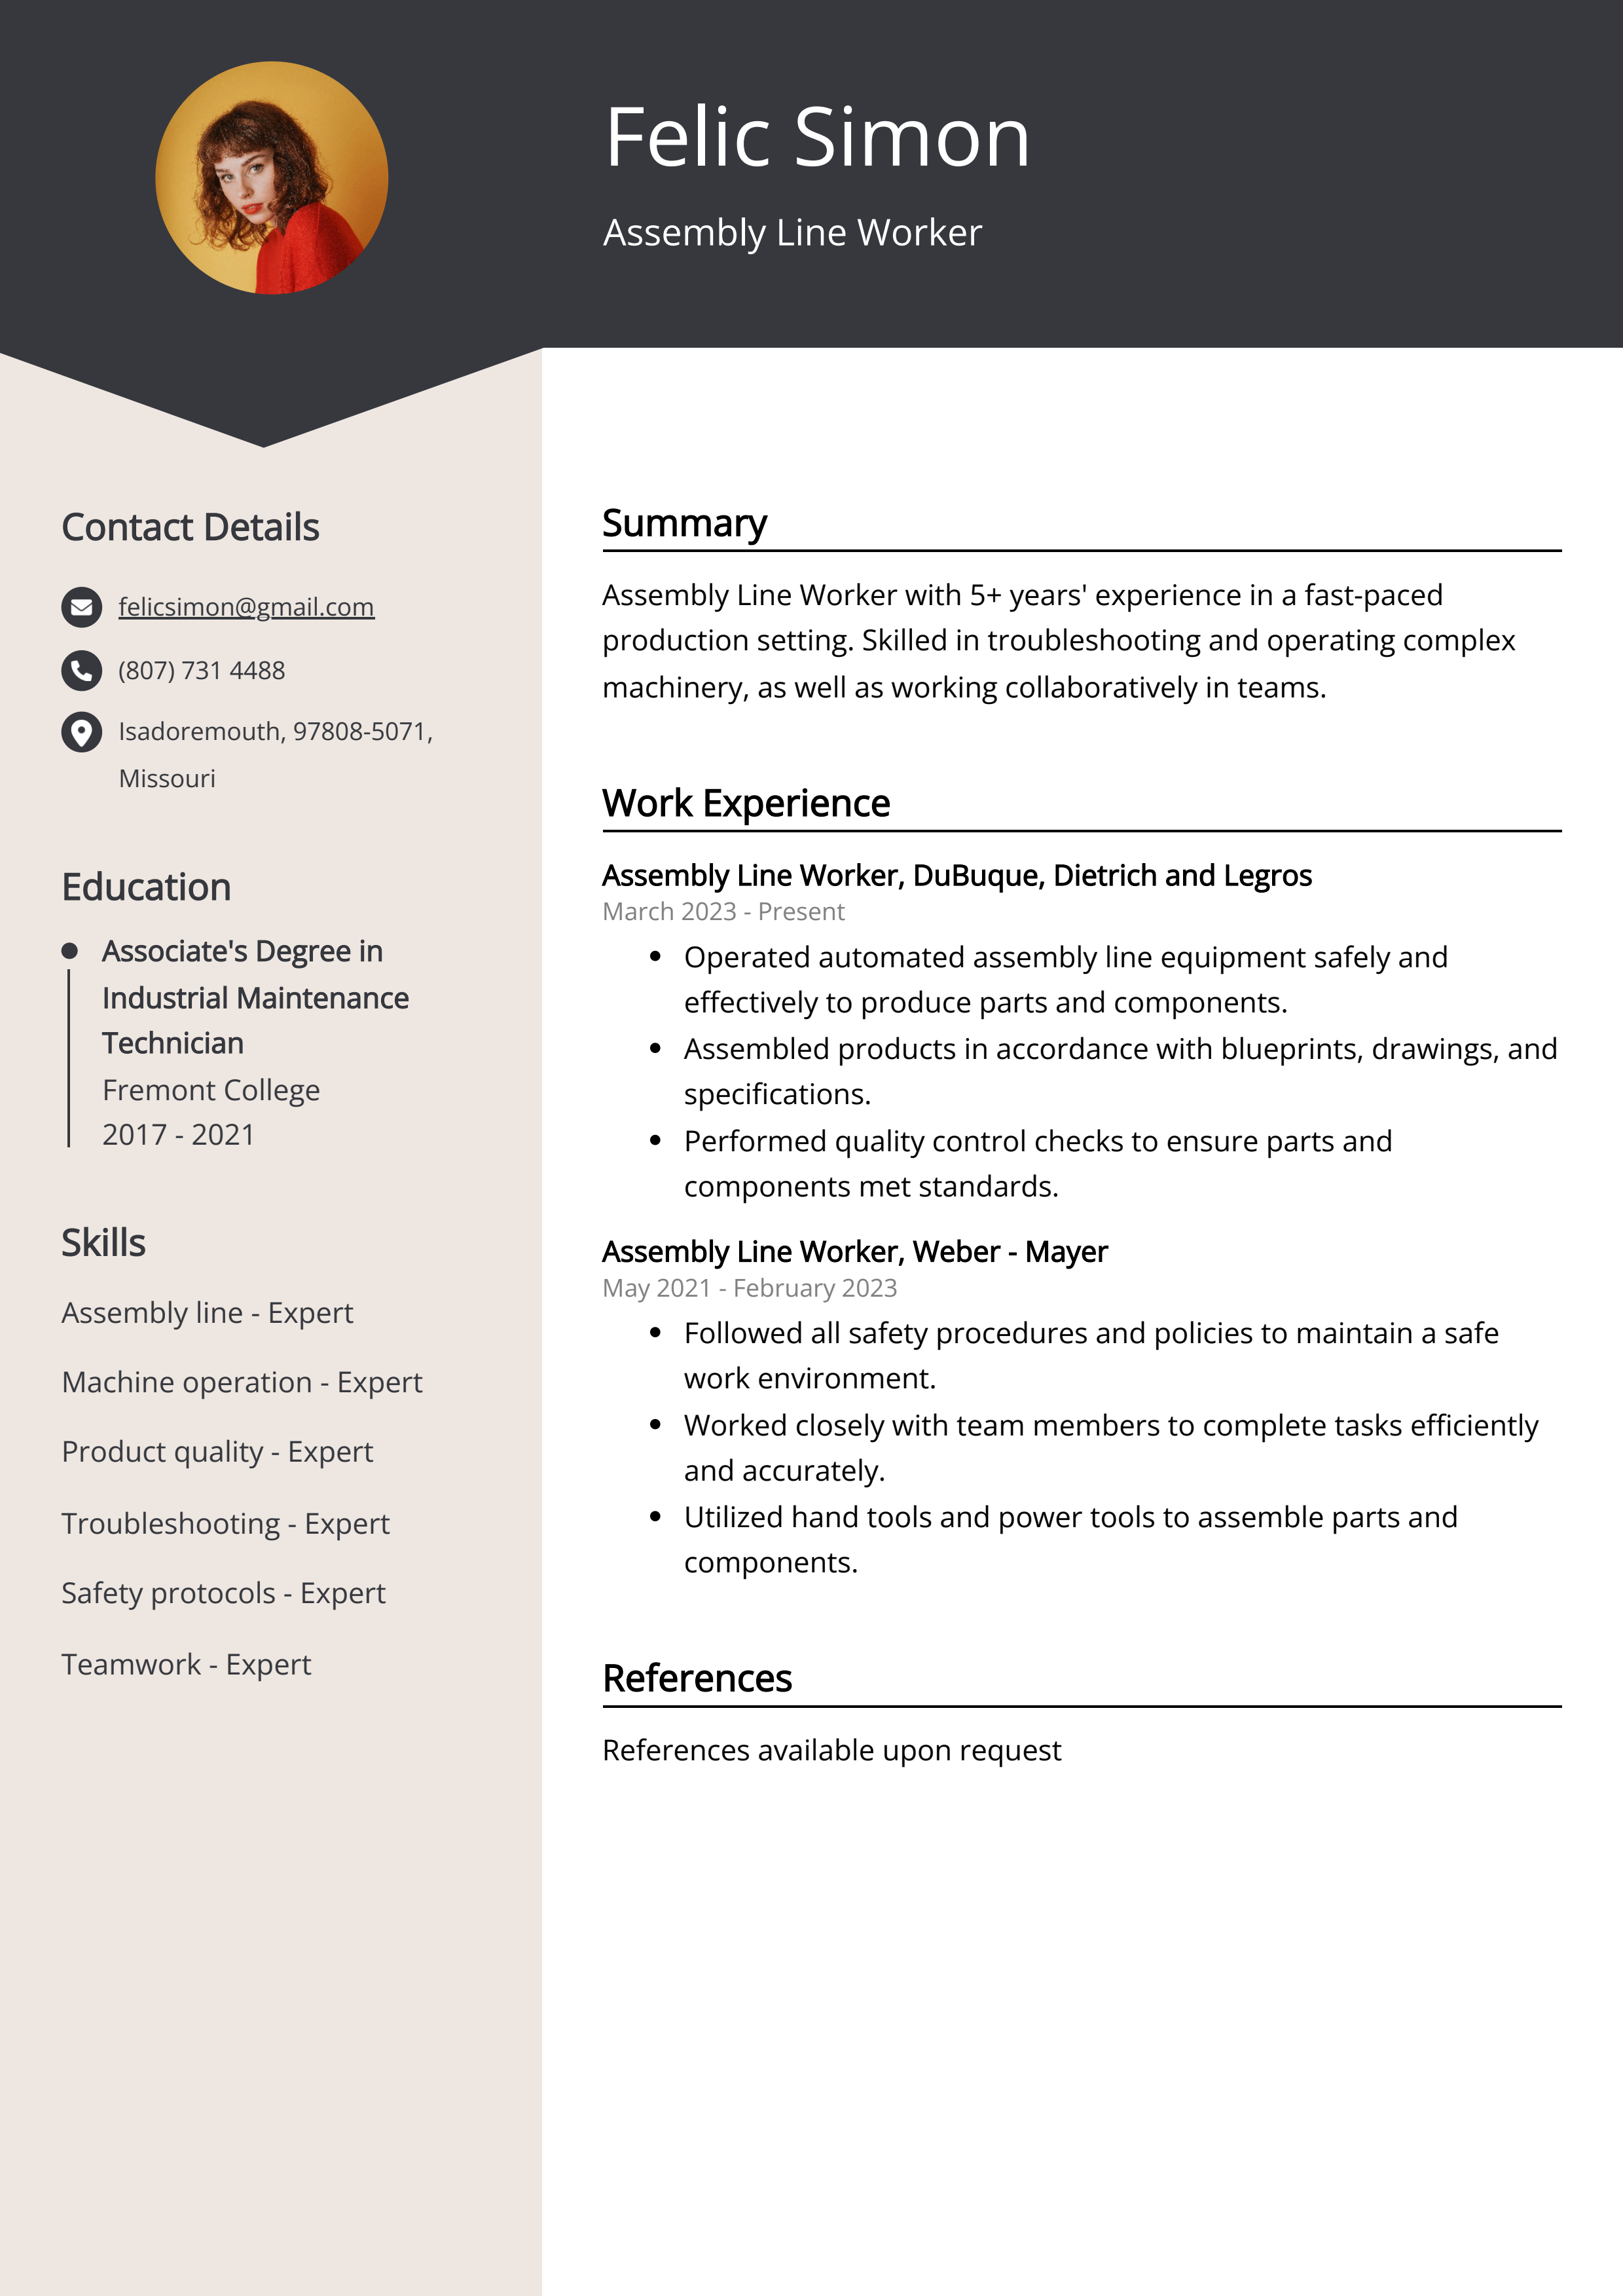 Assembly Line Worker CV Example